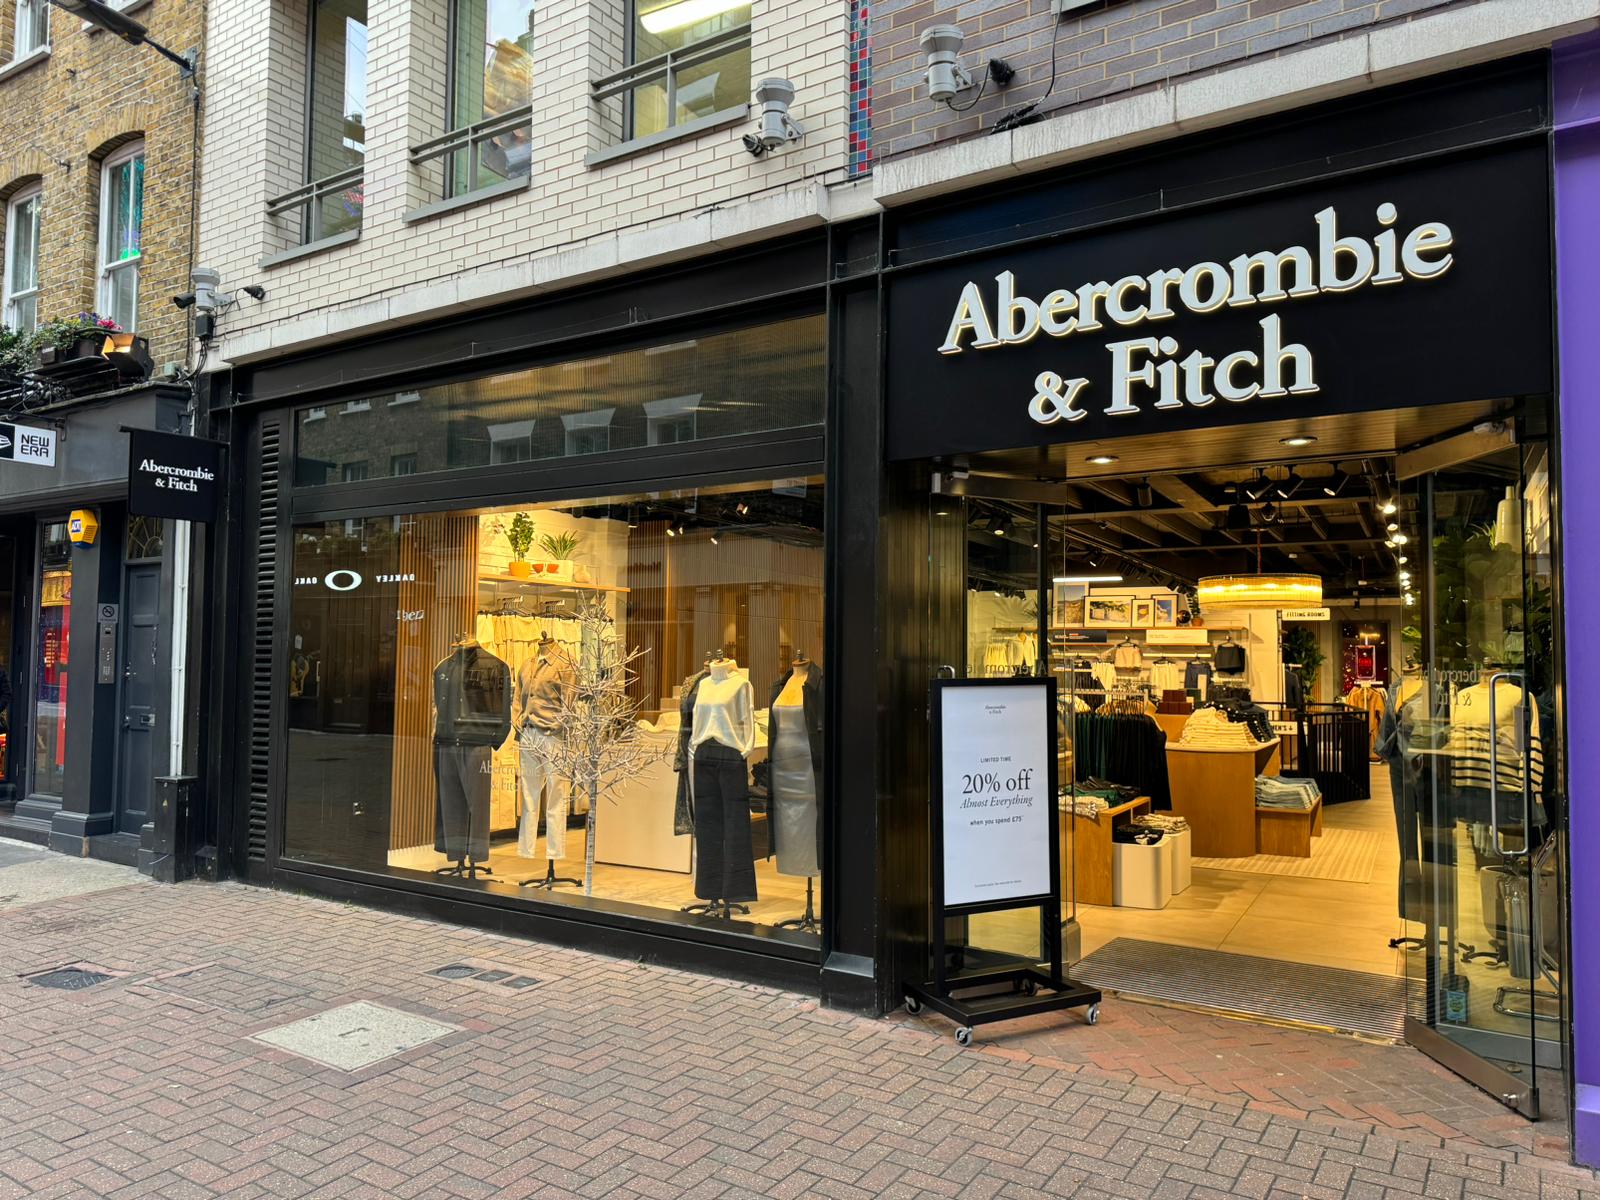 This is Abercrombie & Fitch